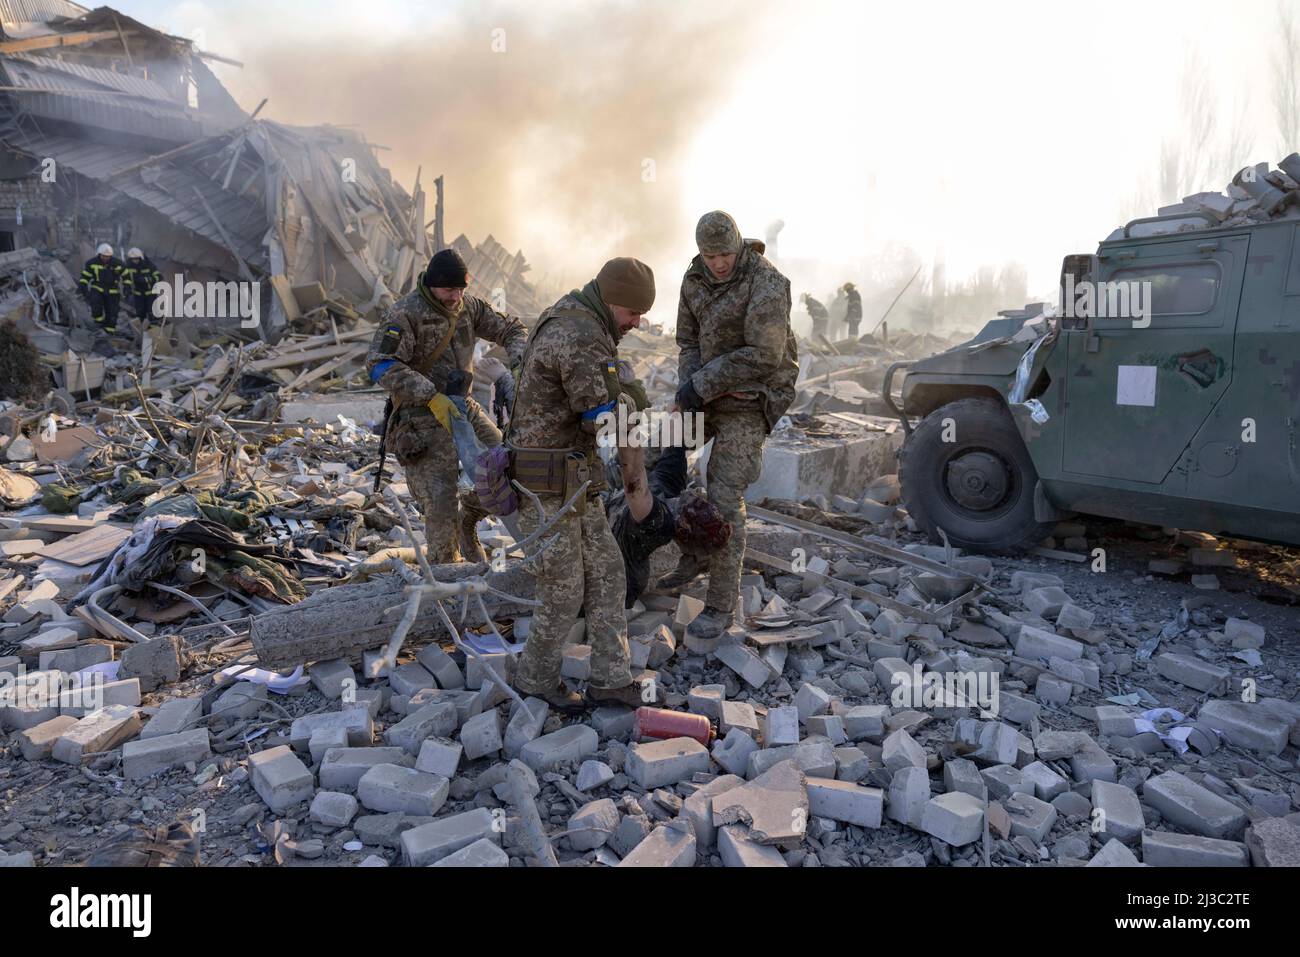 A military base outside Mykolaiv, Ukraine, was hit by a missile attack on March 18, 2022. More than 30 soldiers were killed. Photo: Niclas Hammarstrom / Expressen / TT / code 7194 Stock Photo